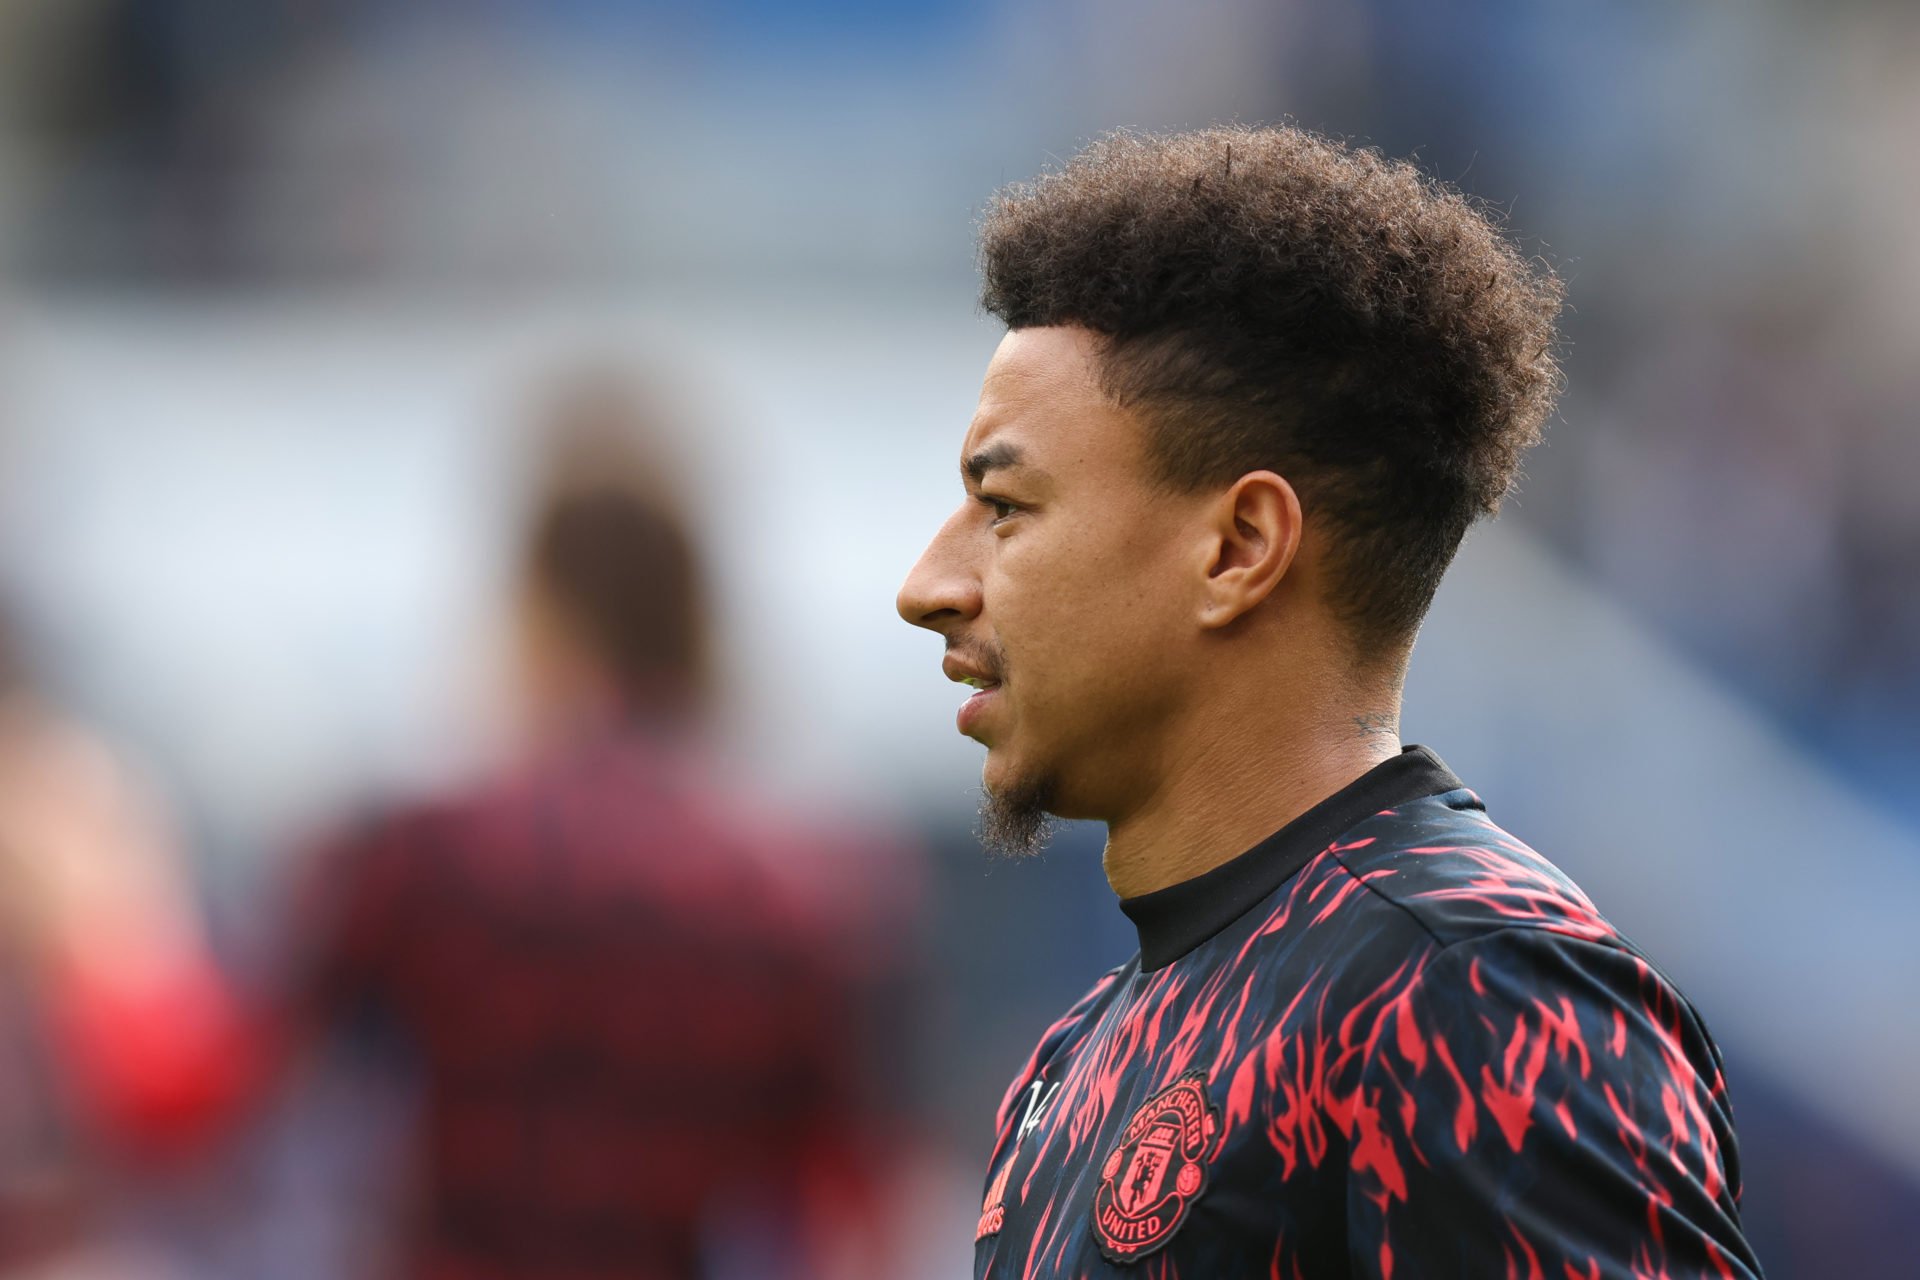 Lingard considering shirt name change at Forest after West Ham snub